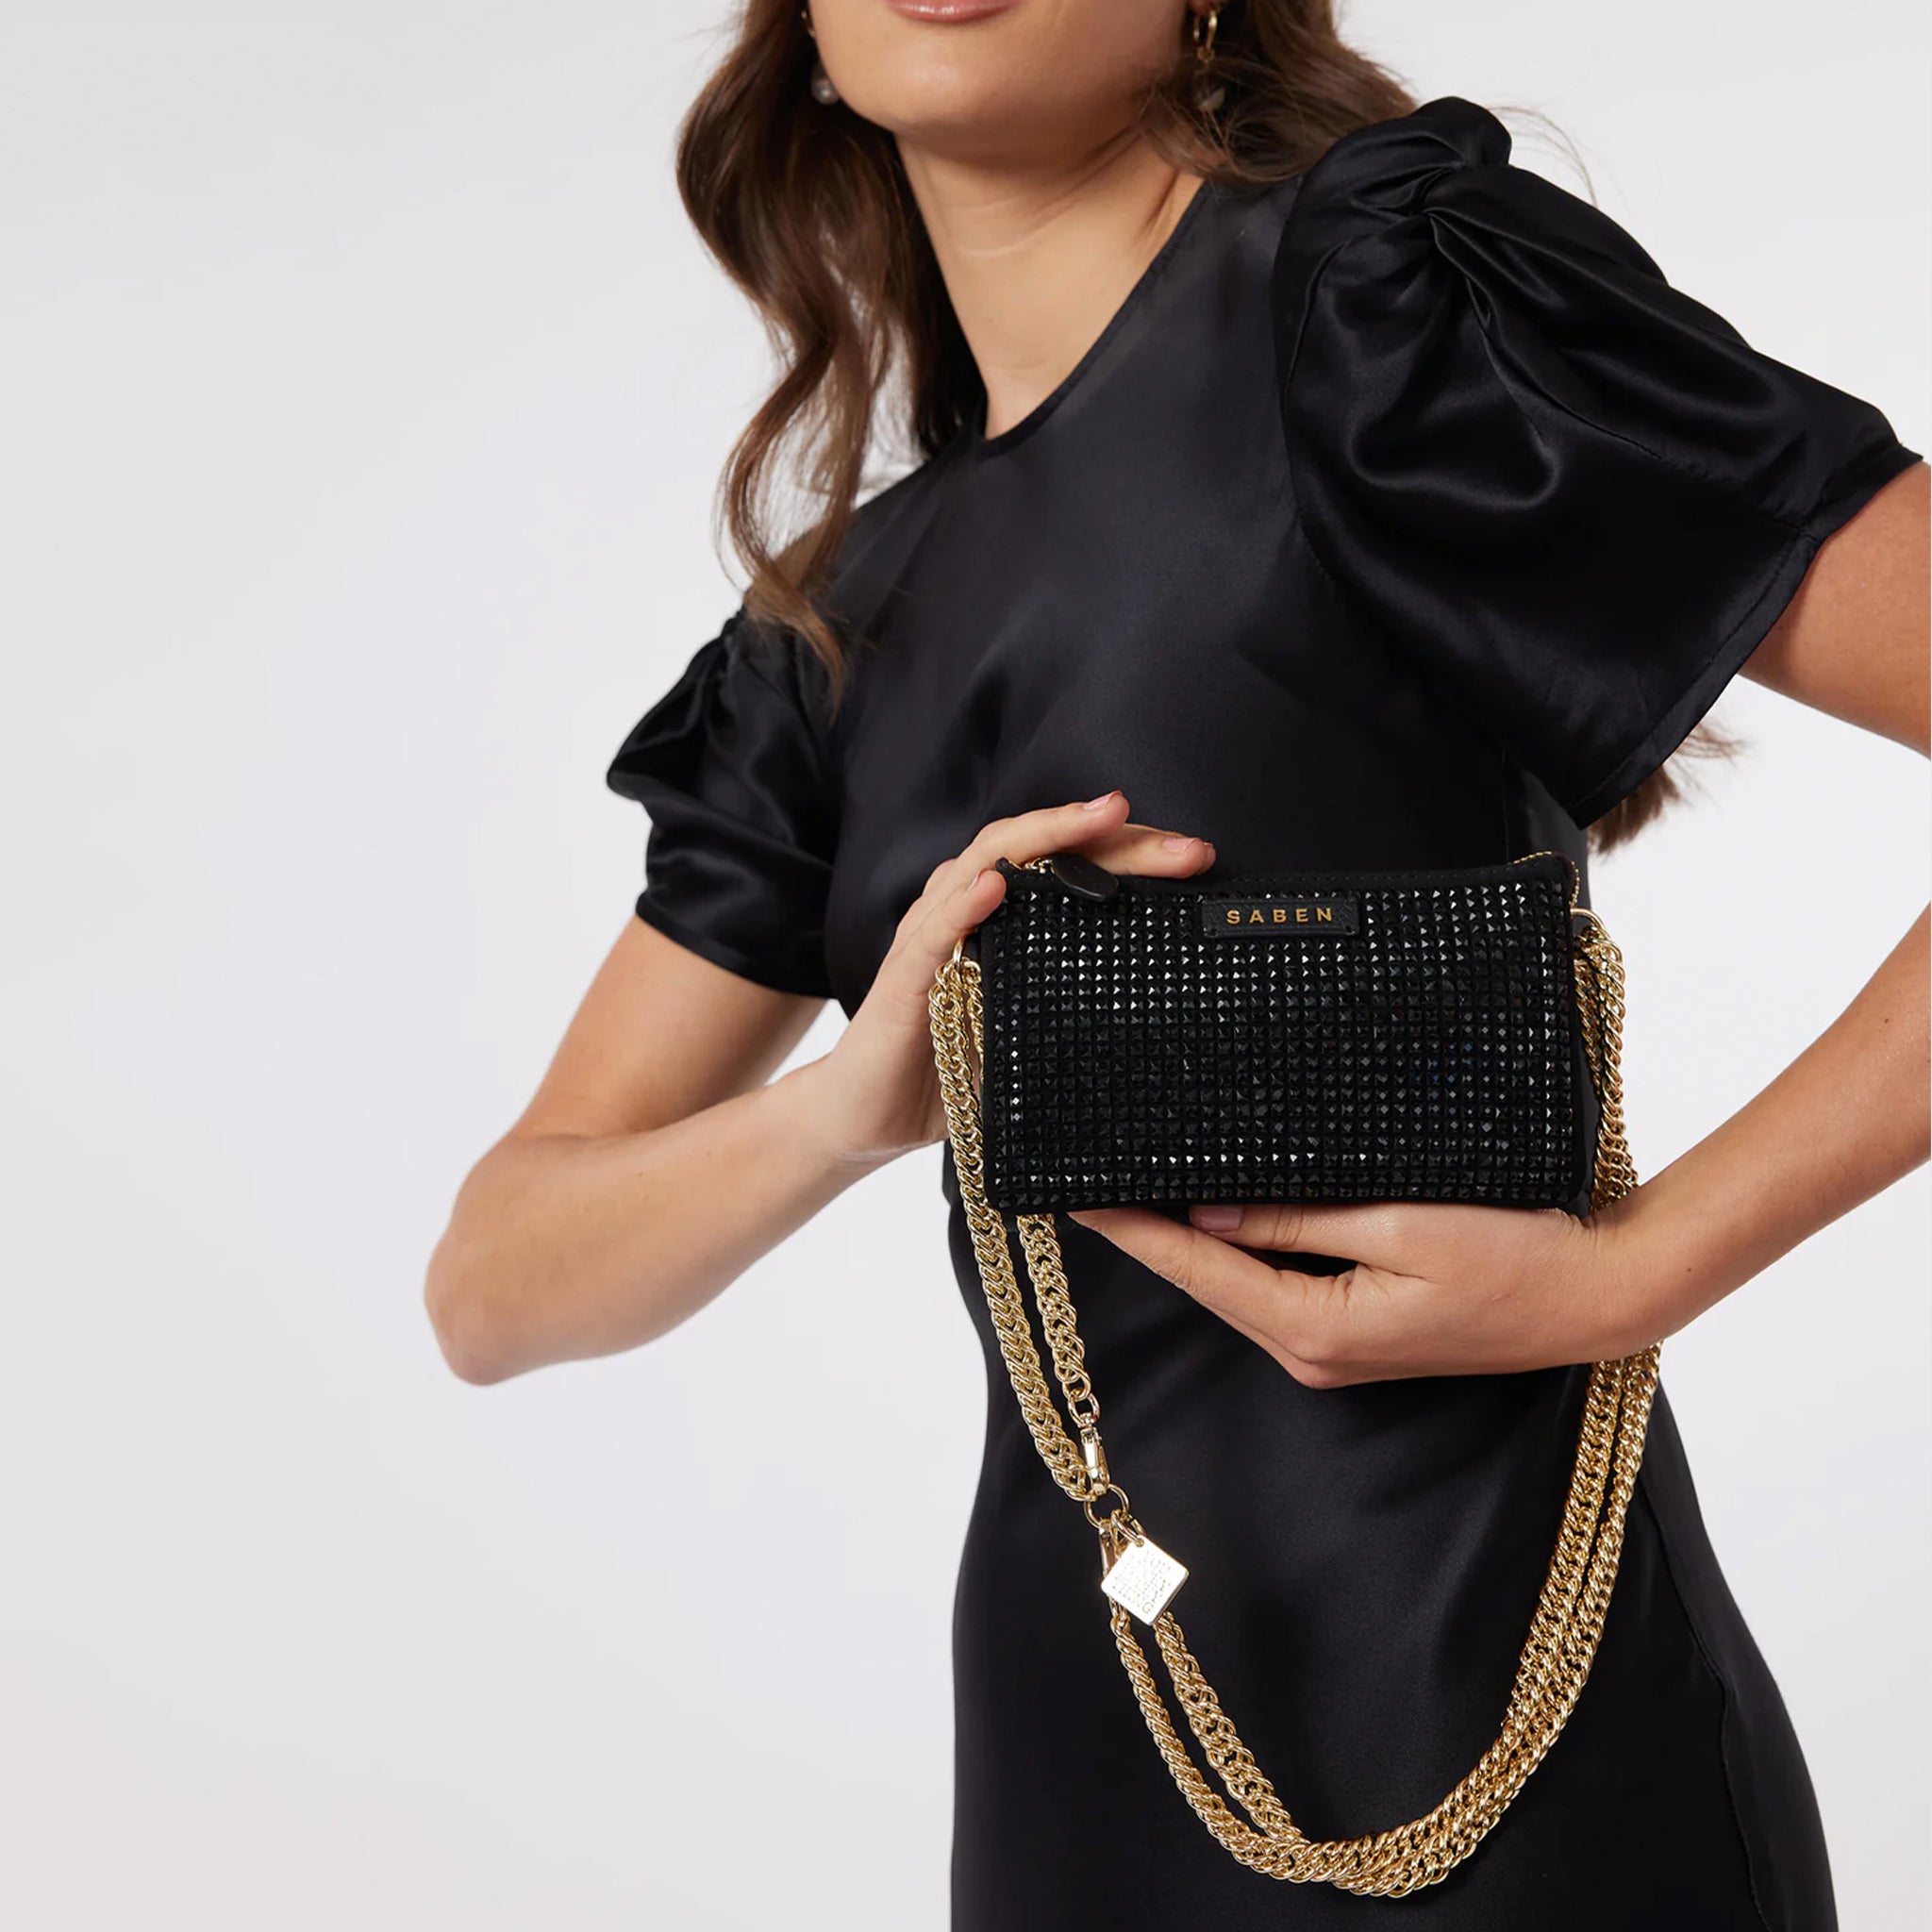 Saben Lily Mini Bag - Black Crystal with Gold Curb Chain